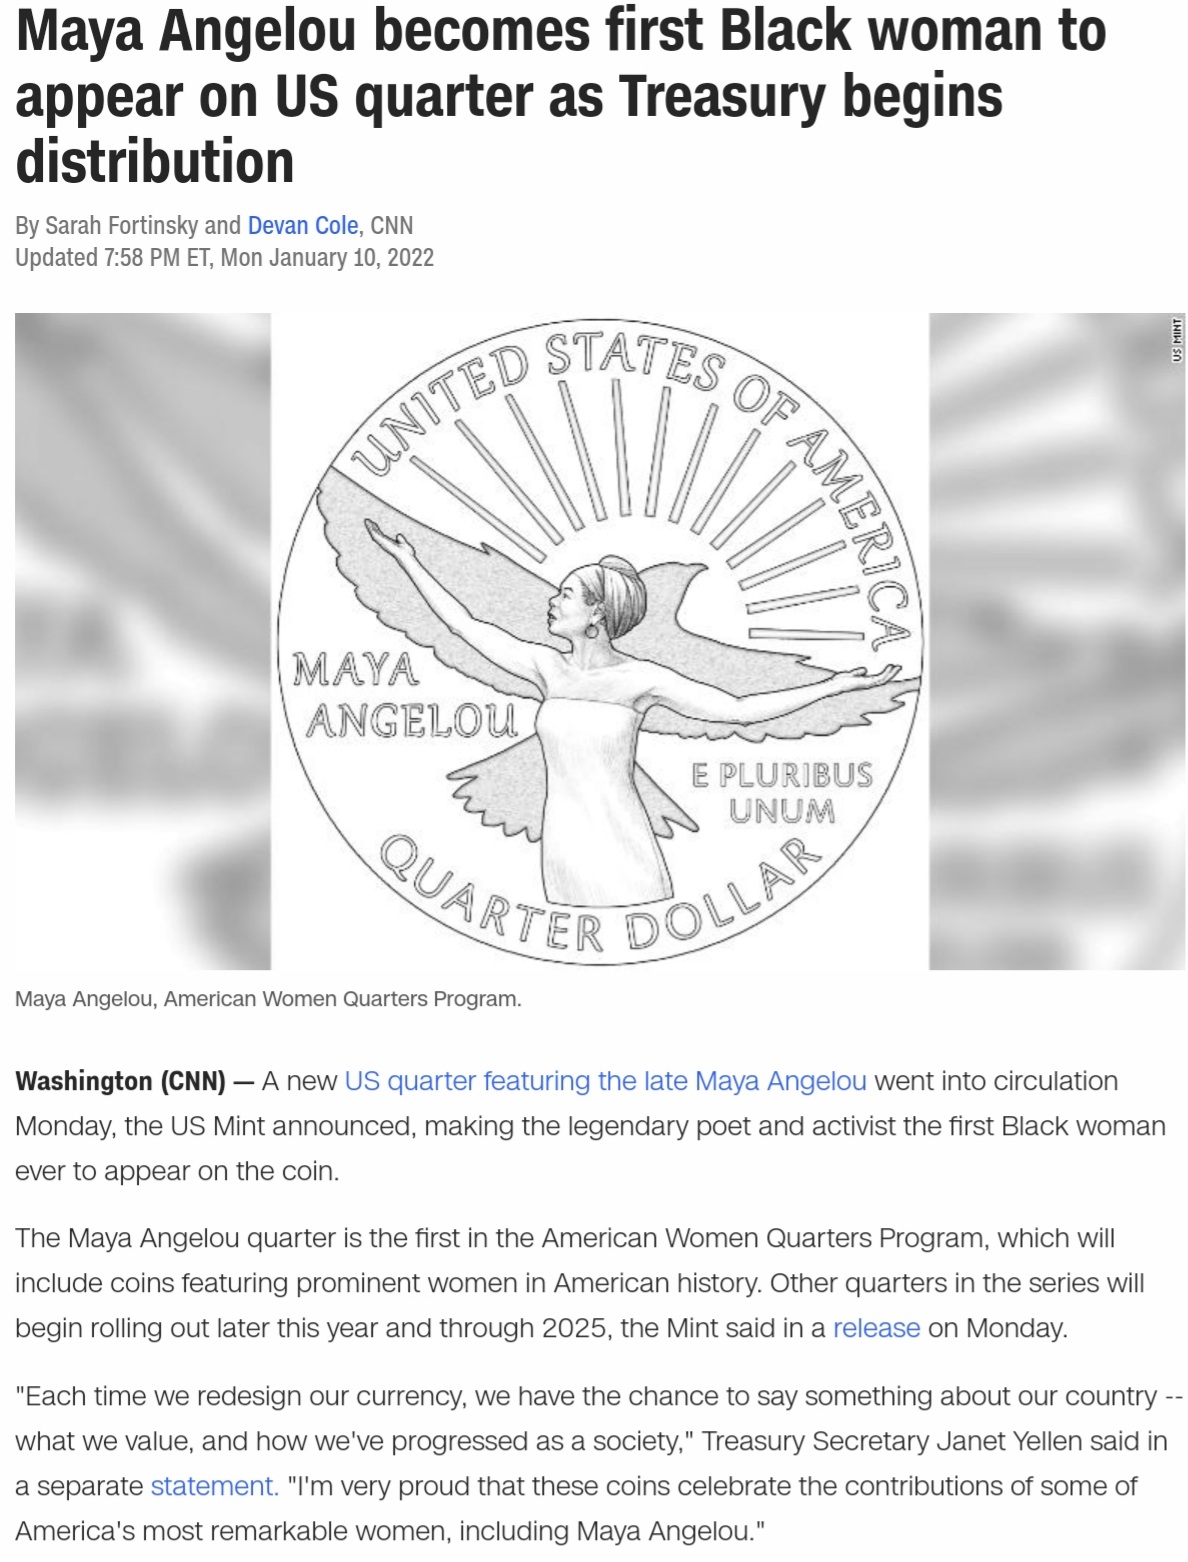 Maya Angelou becomes first Unlit lady to appear on US quarter as Treasury begins distribution